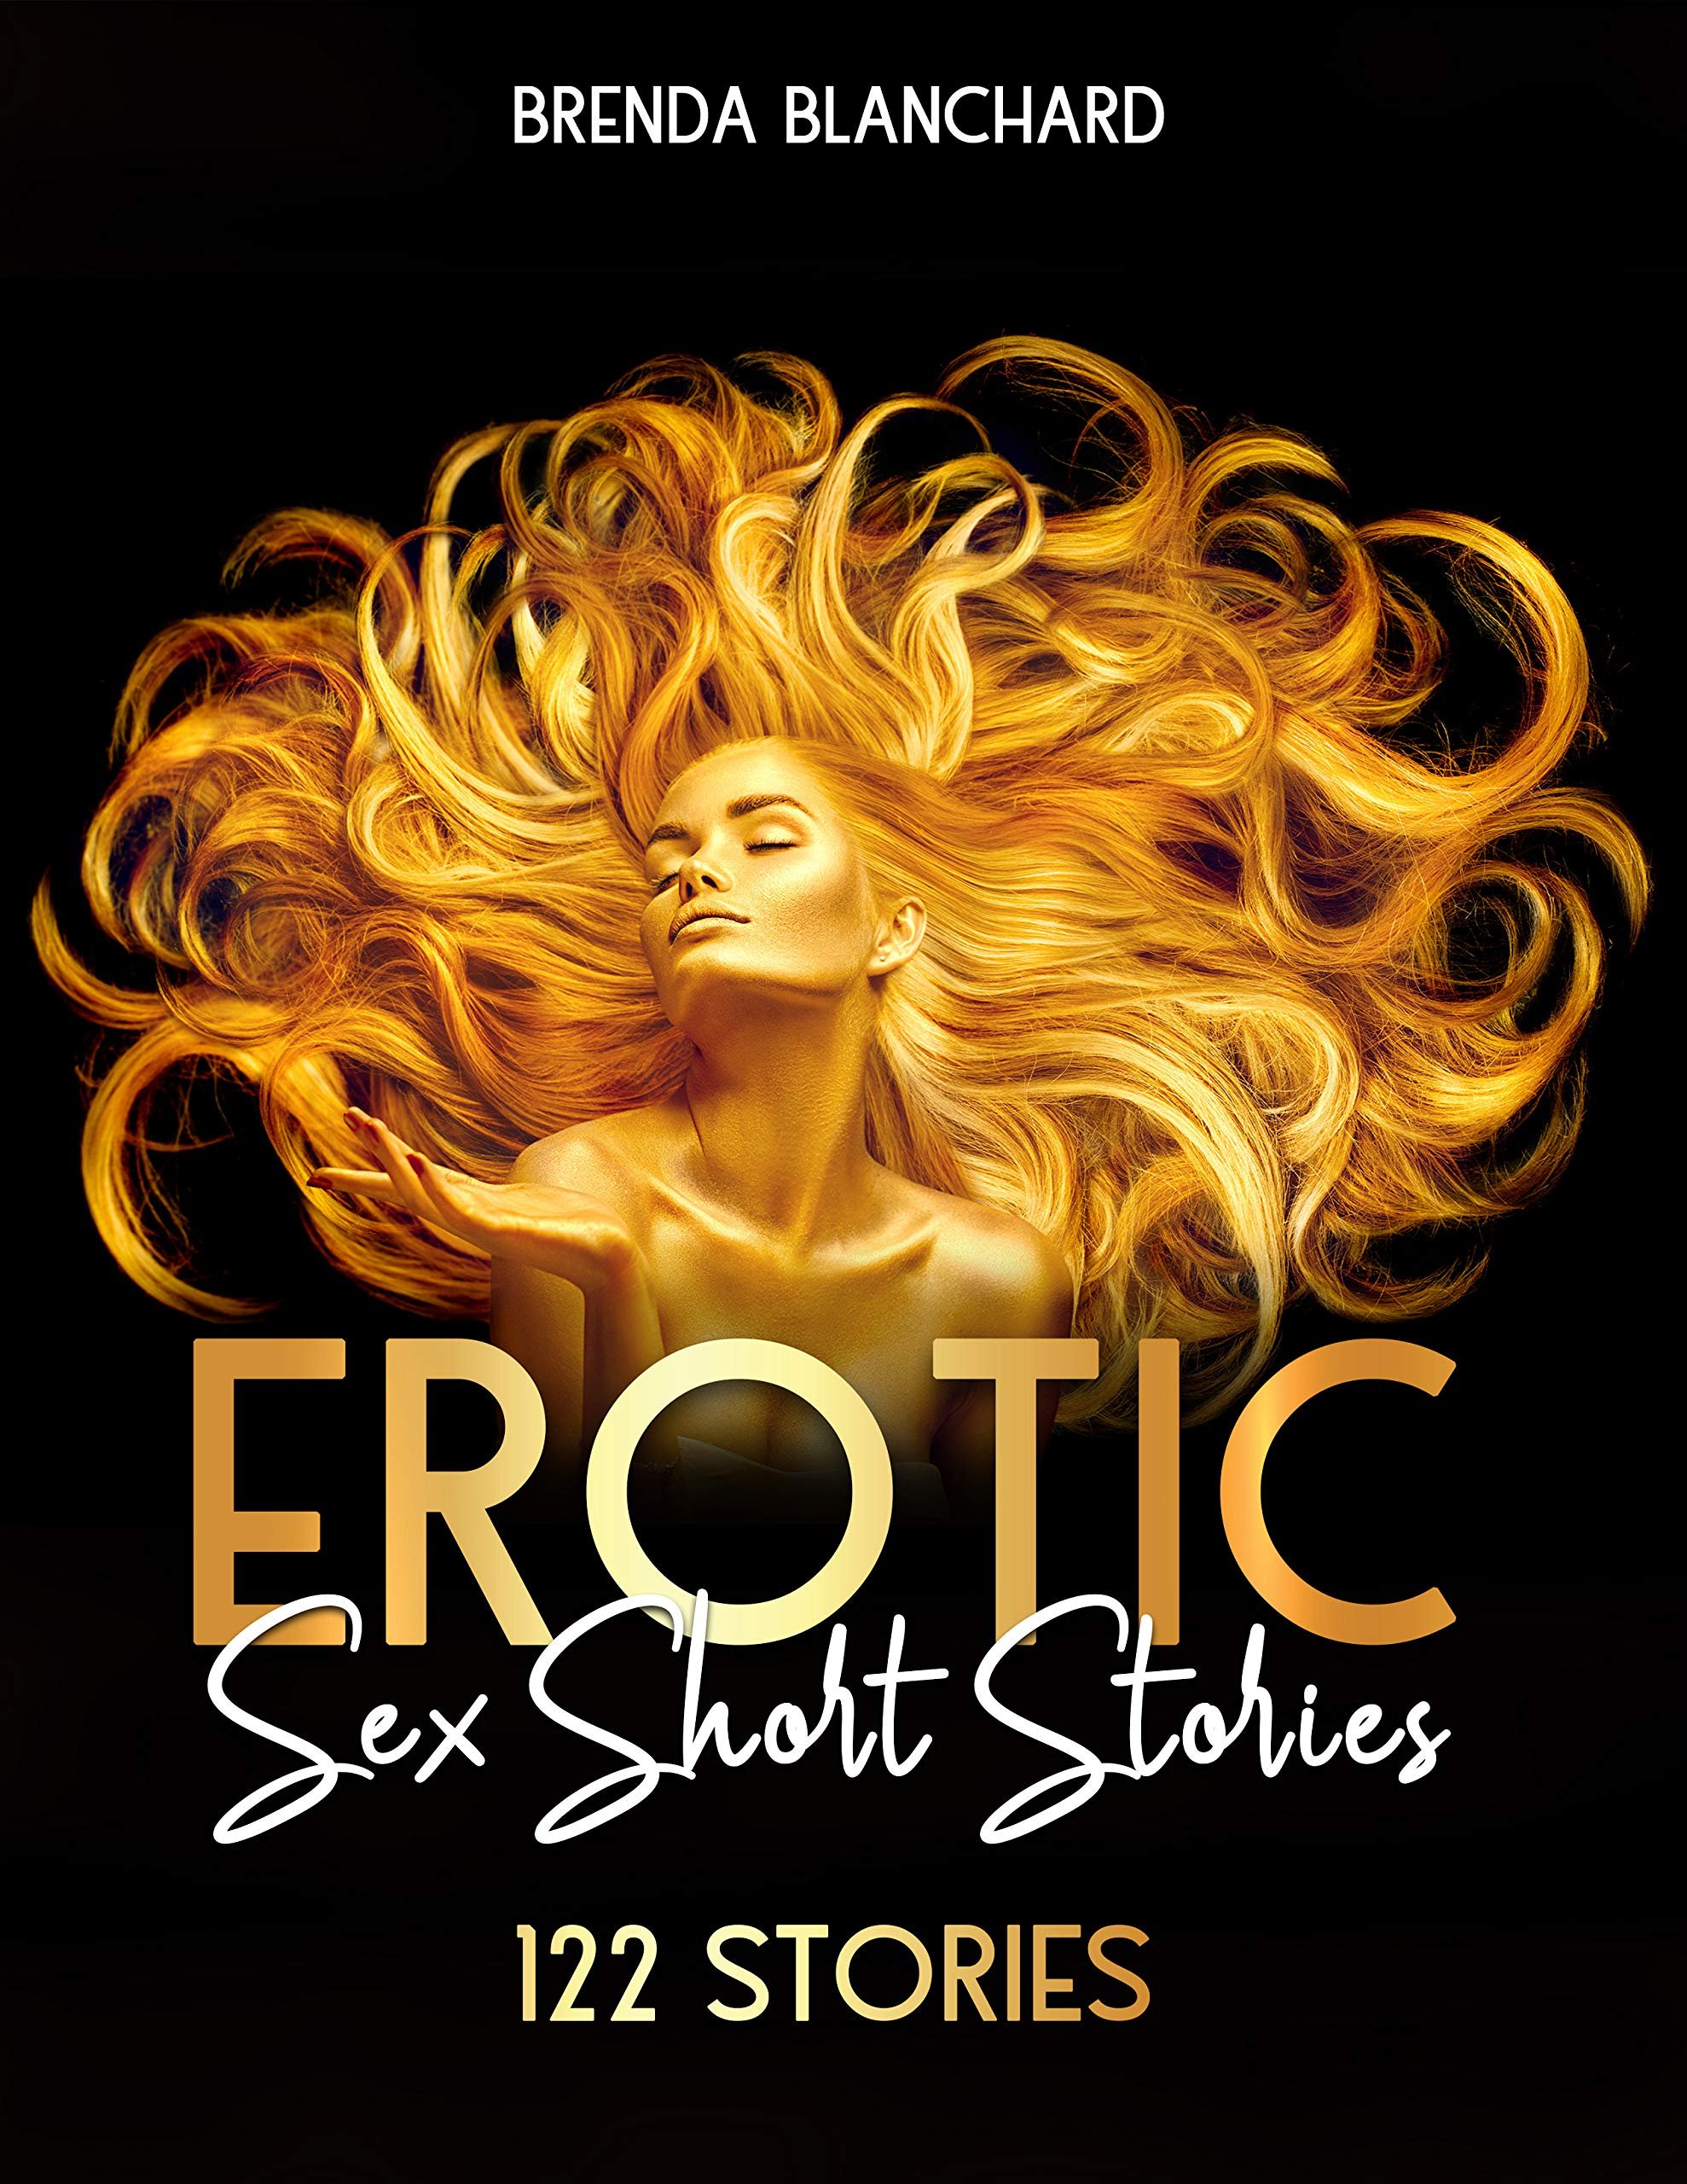 Erotic Sex Short Stories: The Explicit, the Forbidden, the Taboo, the Alternative, the Hot. All Your Dirty Dreams Are in This Ultimate Collection by Brenda with 122 Adult Short Stories Cover